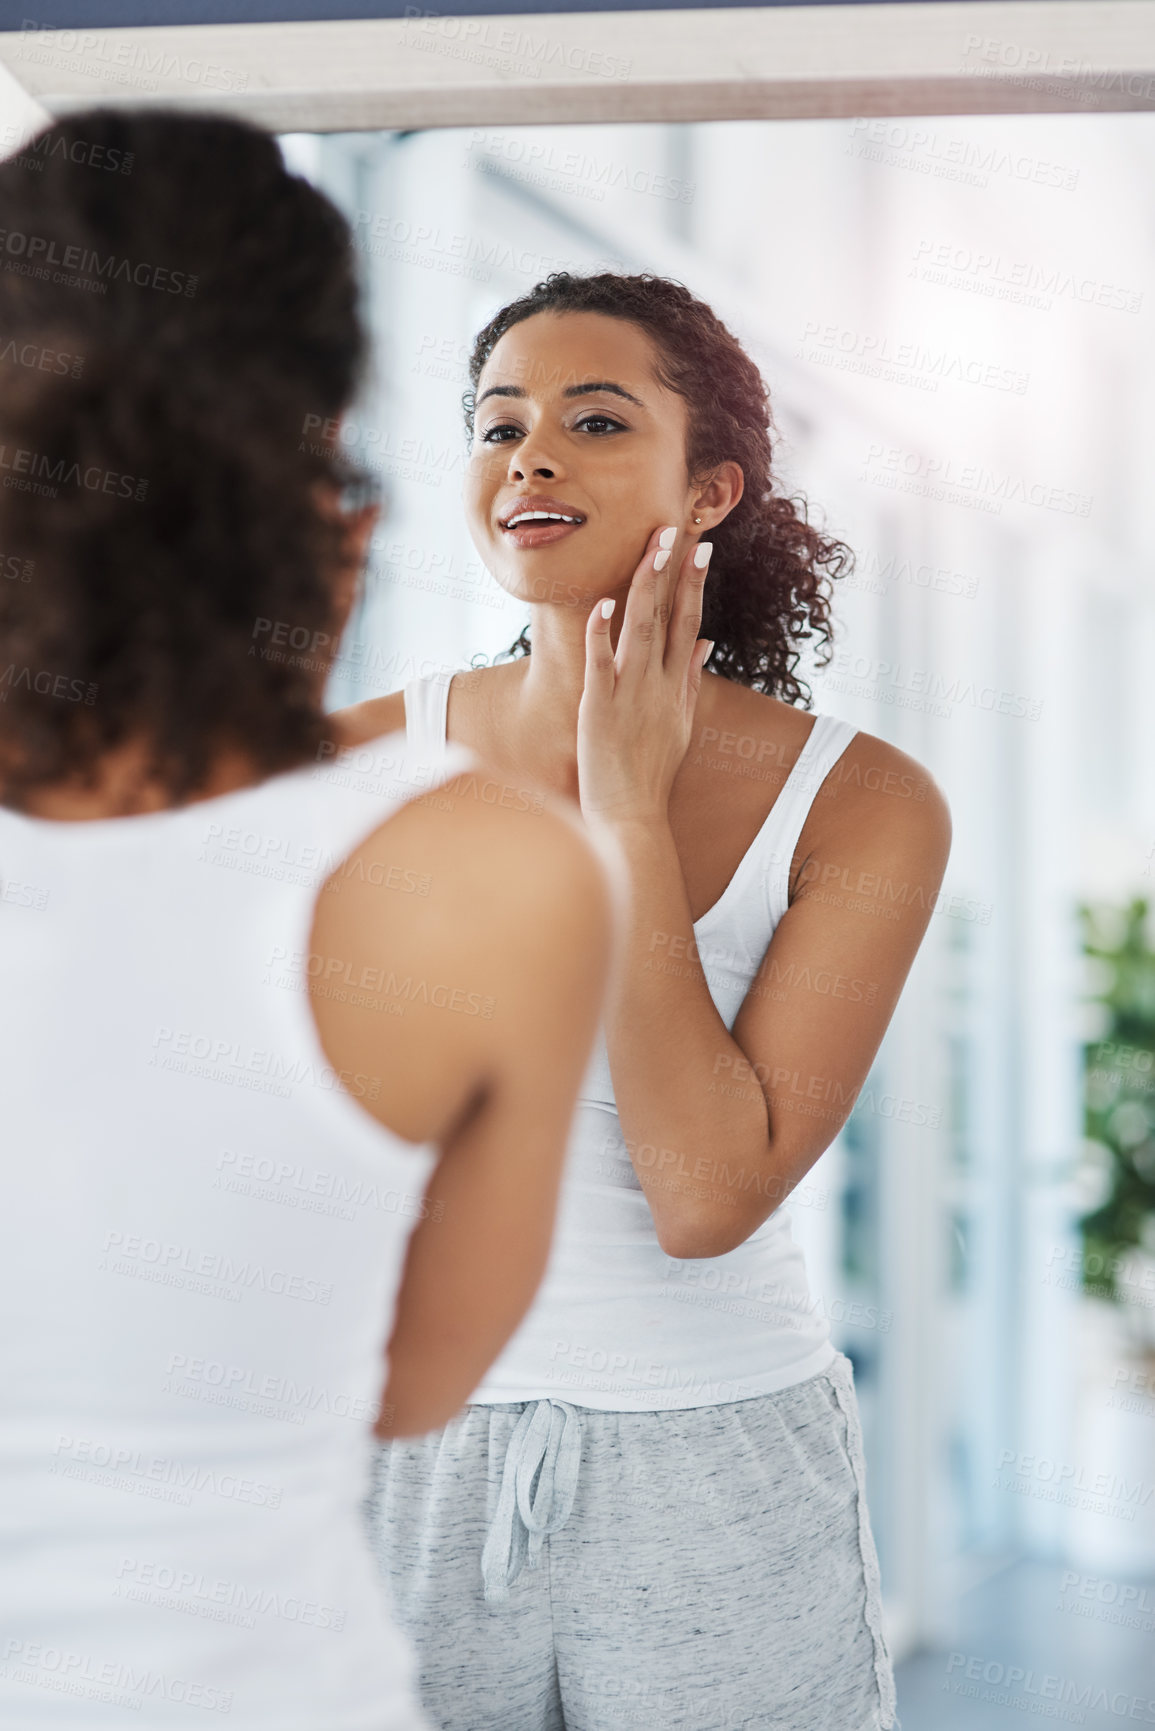 Buy stock photo Shot of an attractive young woman inspecting her face in front of the mirror in her bedroom